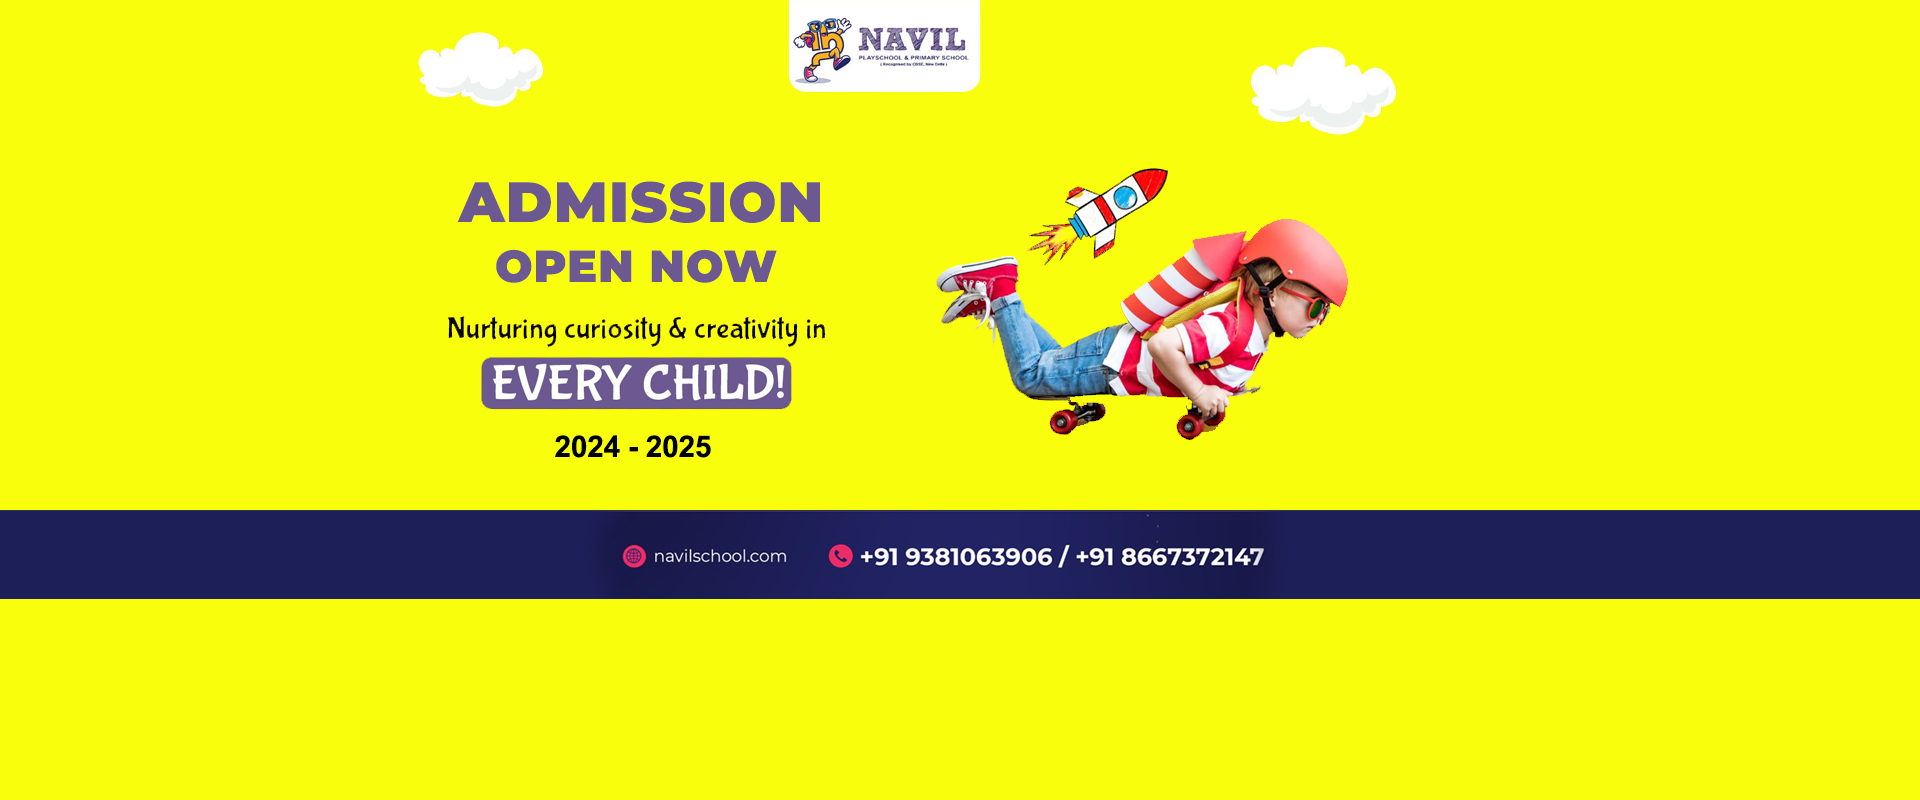 Navil Play School is a school in Chennai, India, which offers Preschool and CBSE curriculum. It also provides Playgroups and Kindergartens.